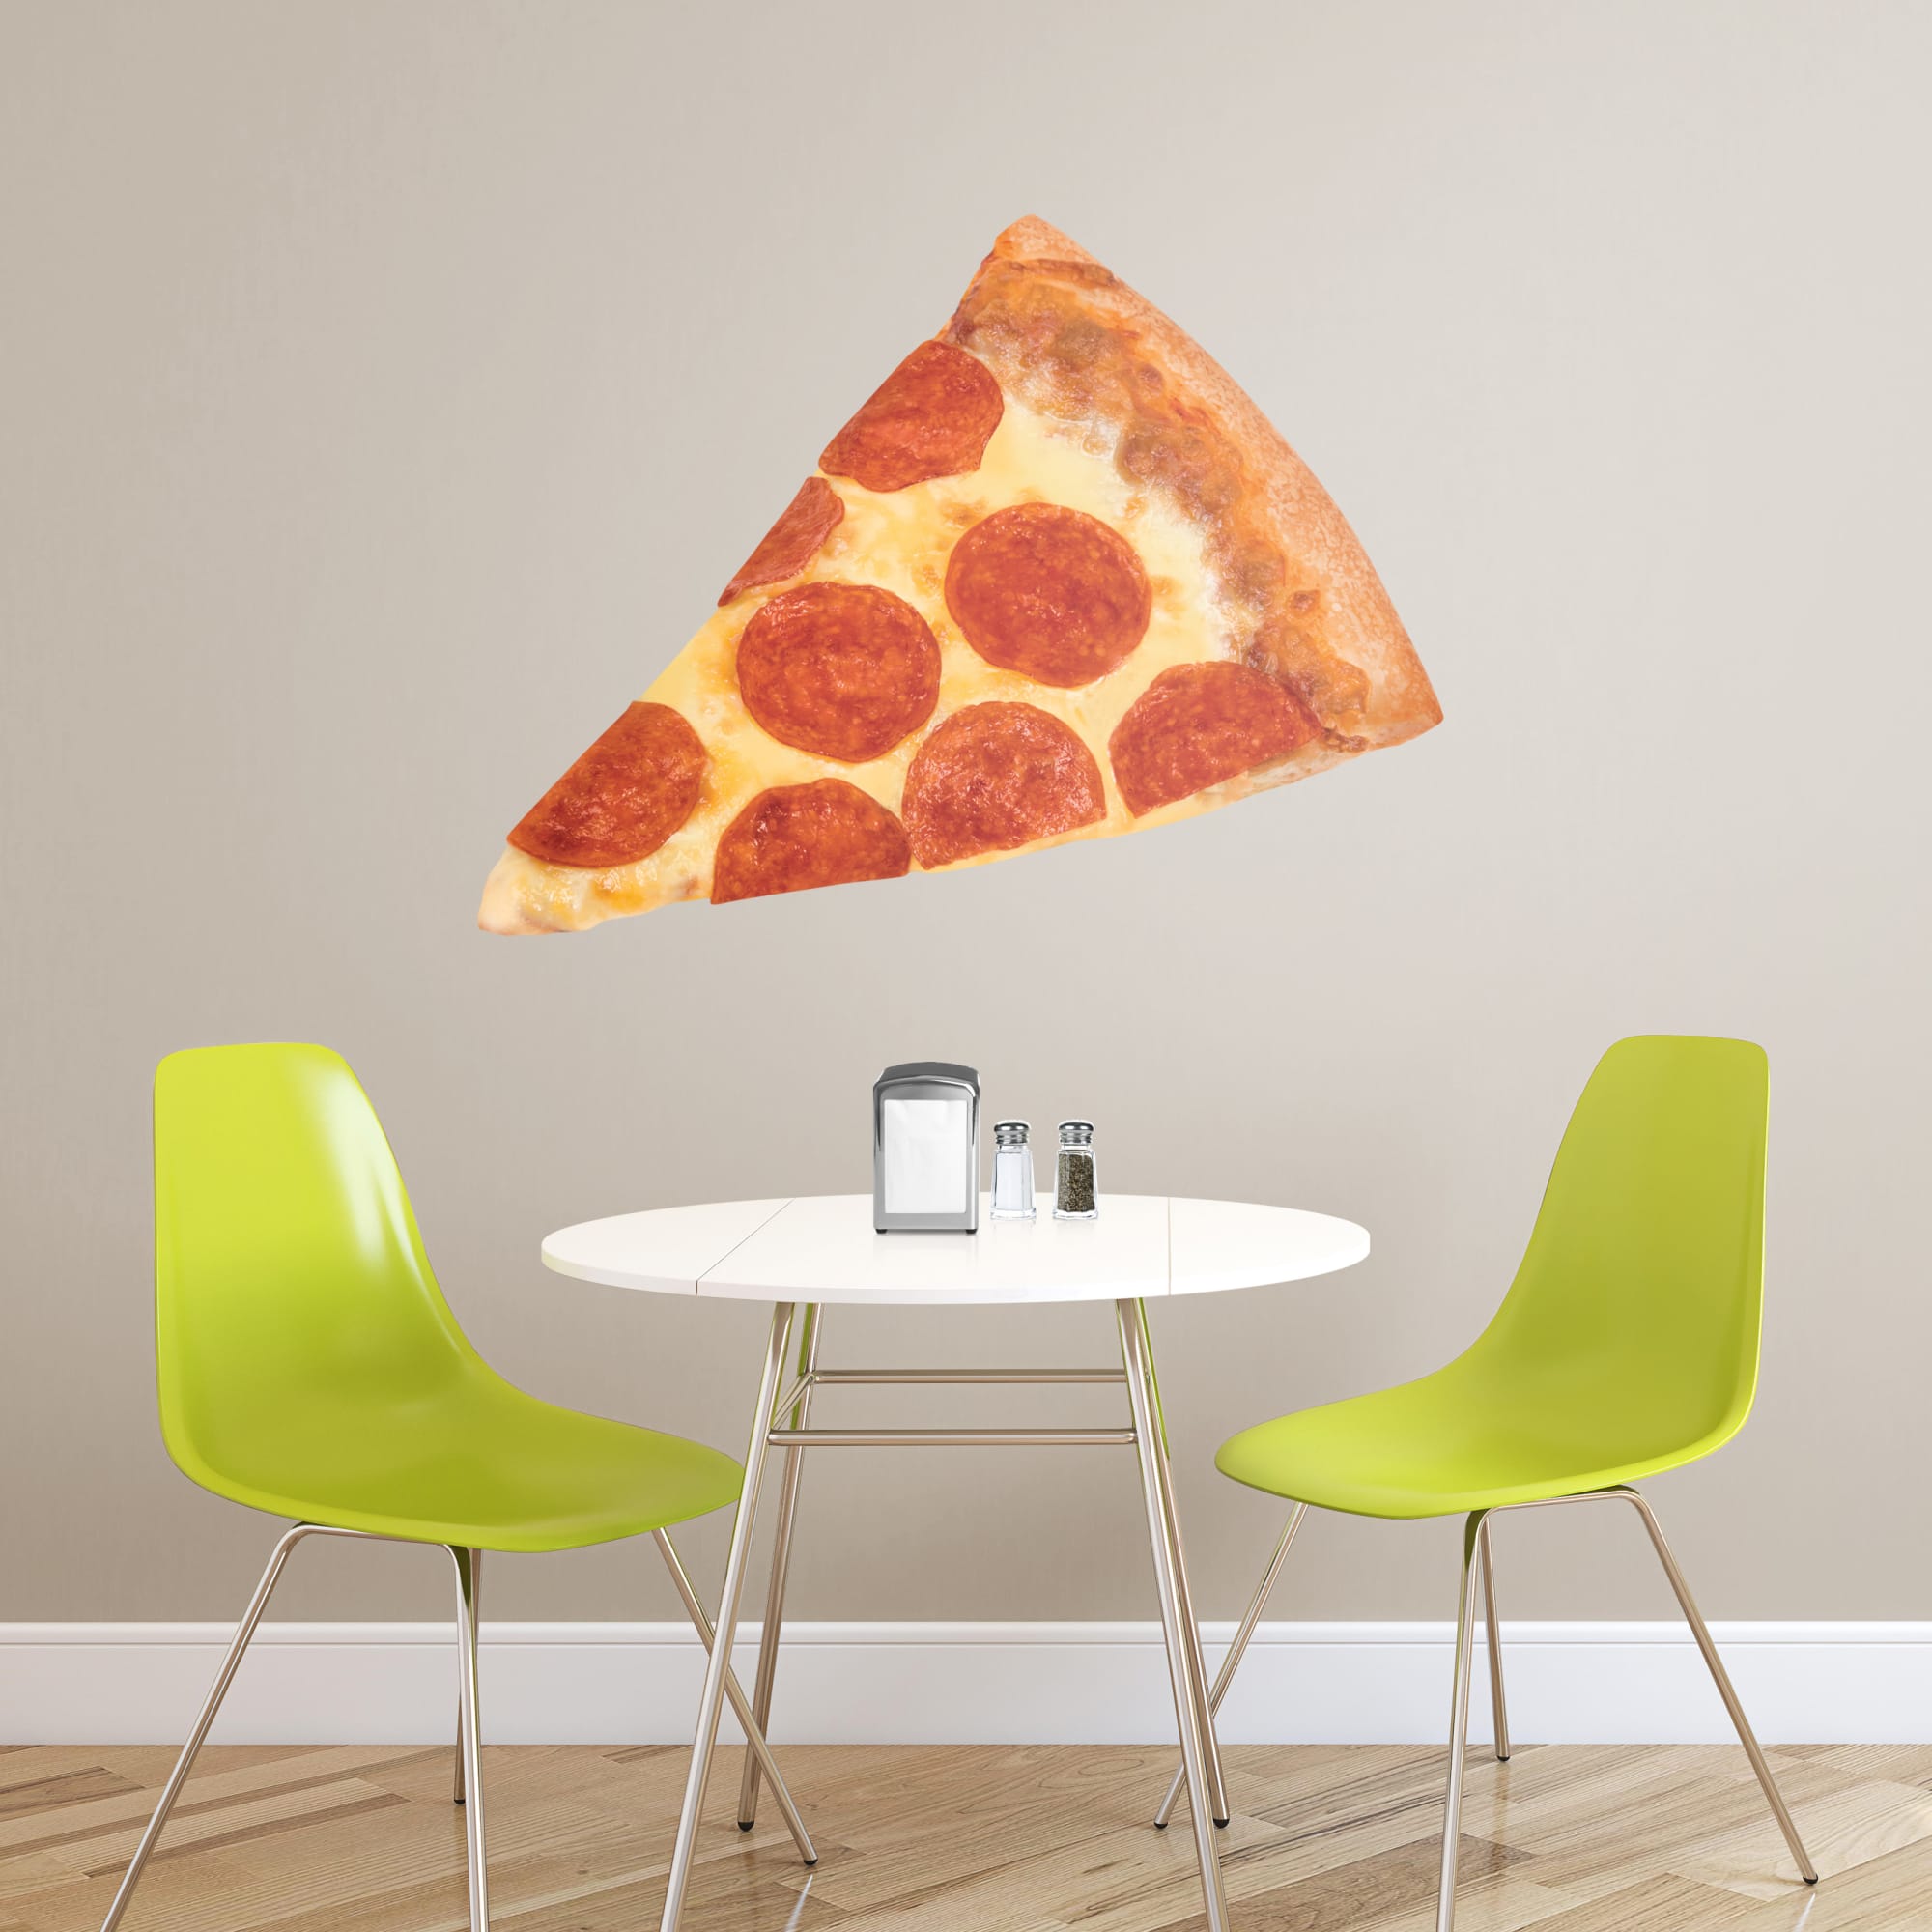 Pizza - Removable Vinyl Decal Giant Pizza + 2 Decals (47"W x 36"H) by Fathead